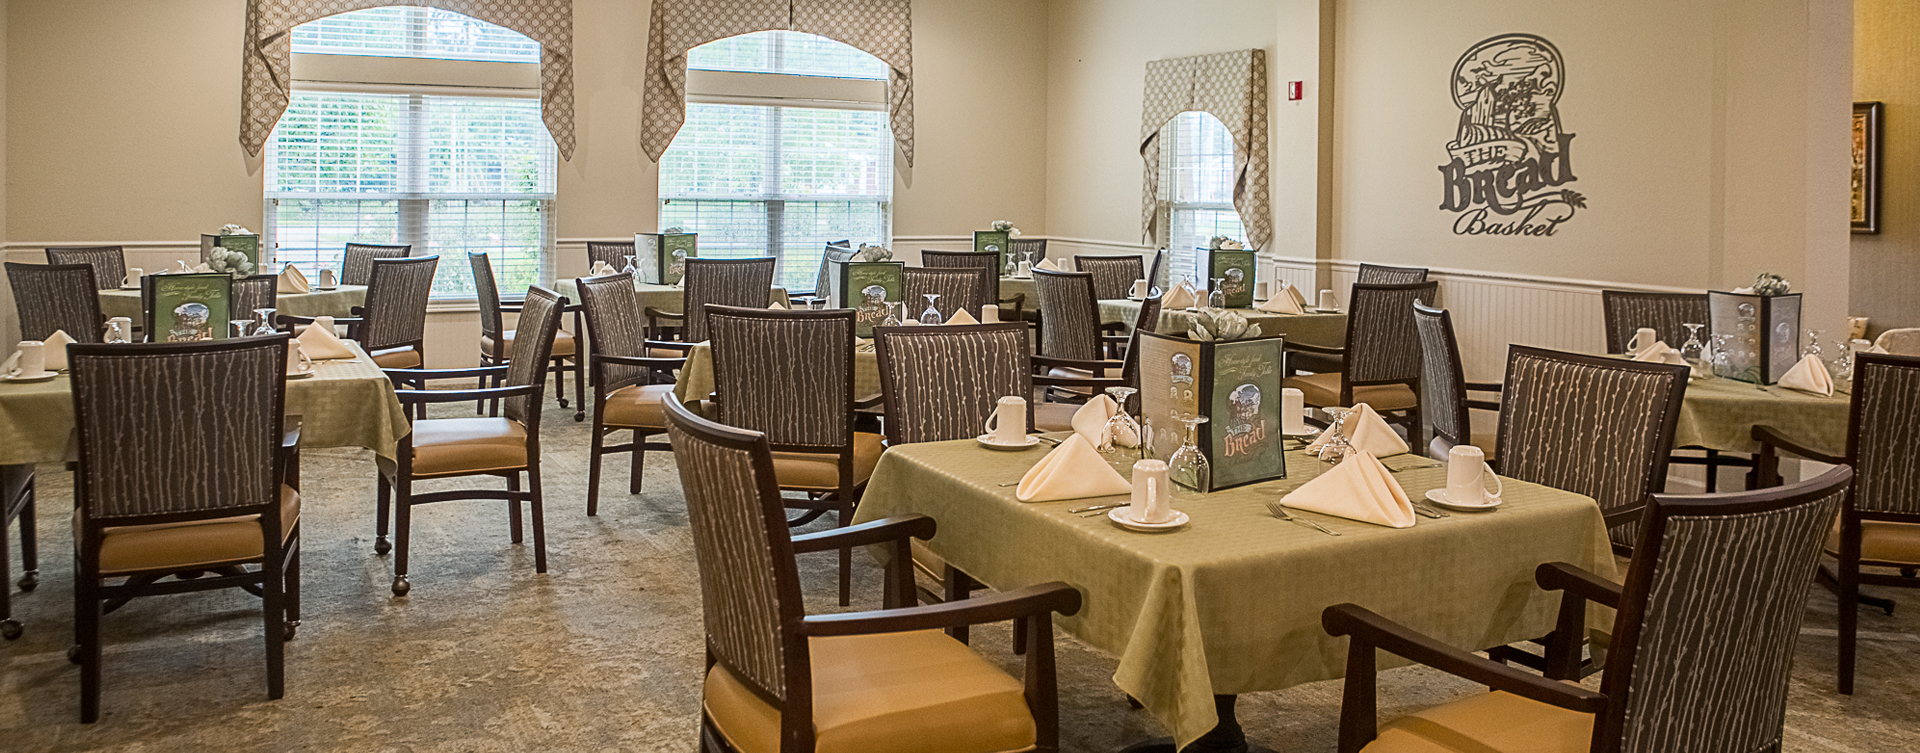 Enjoy homestyle food with made-from-scratch recipes in our dining room at Bickford of Clinton